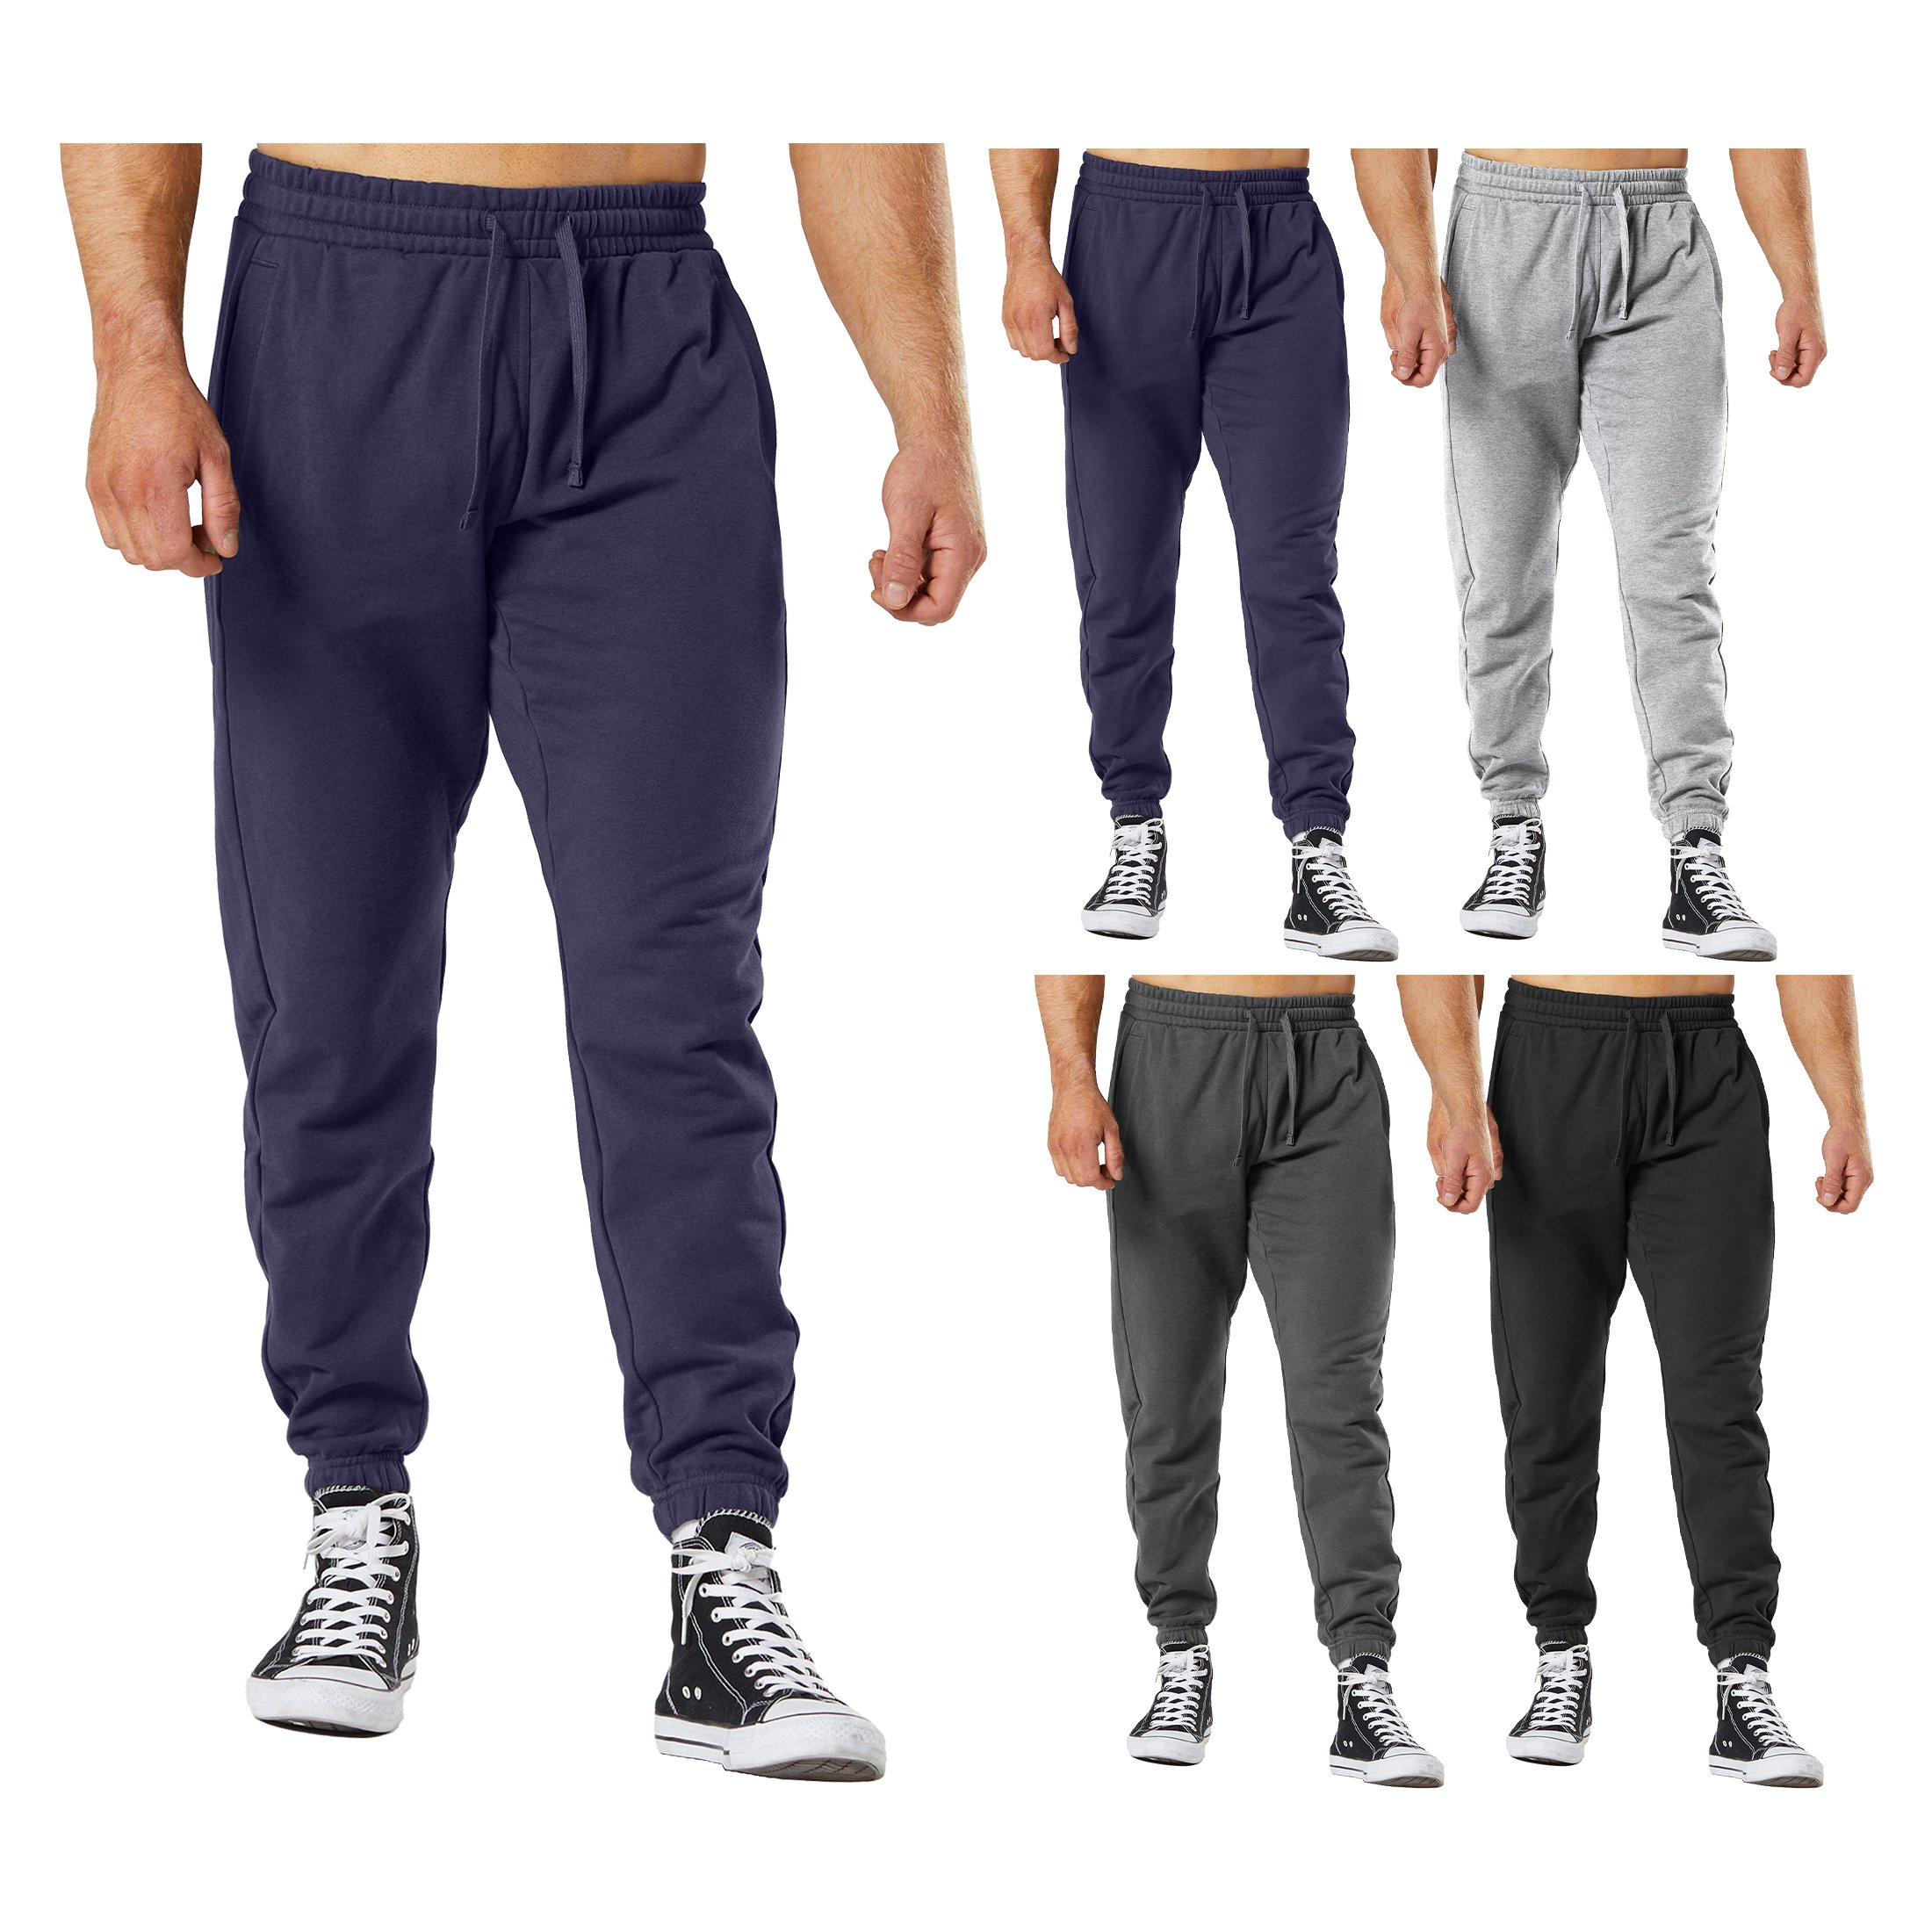 2-Pack: Men's Casual Fleece-Lined Elastic Bottom Jogger Pants With Pockets - X-Large